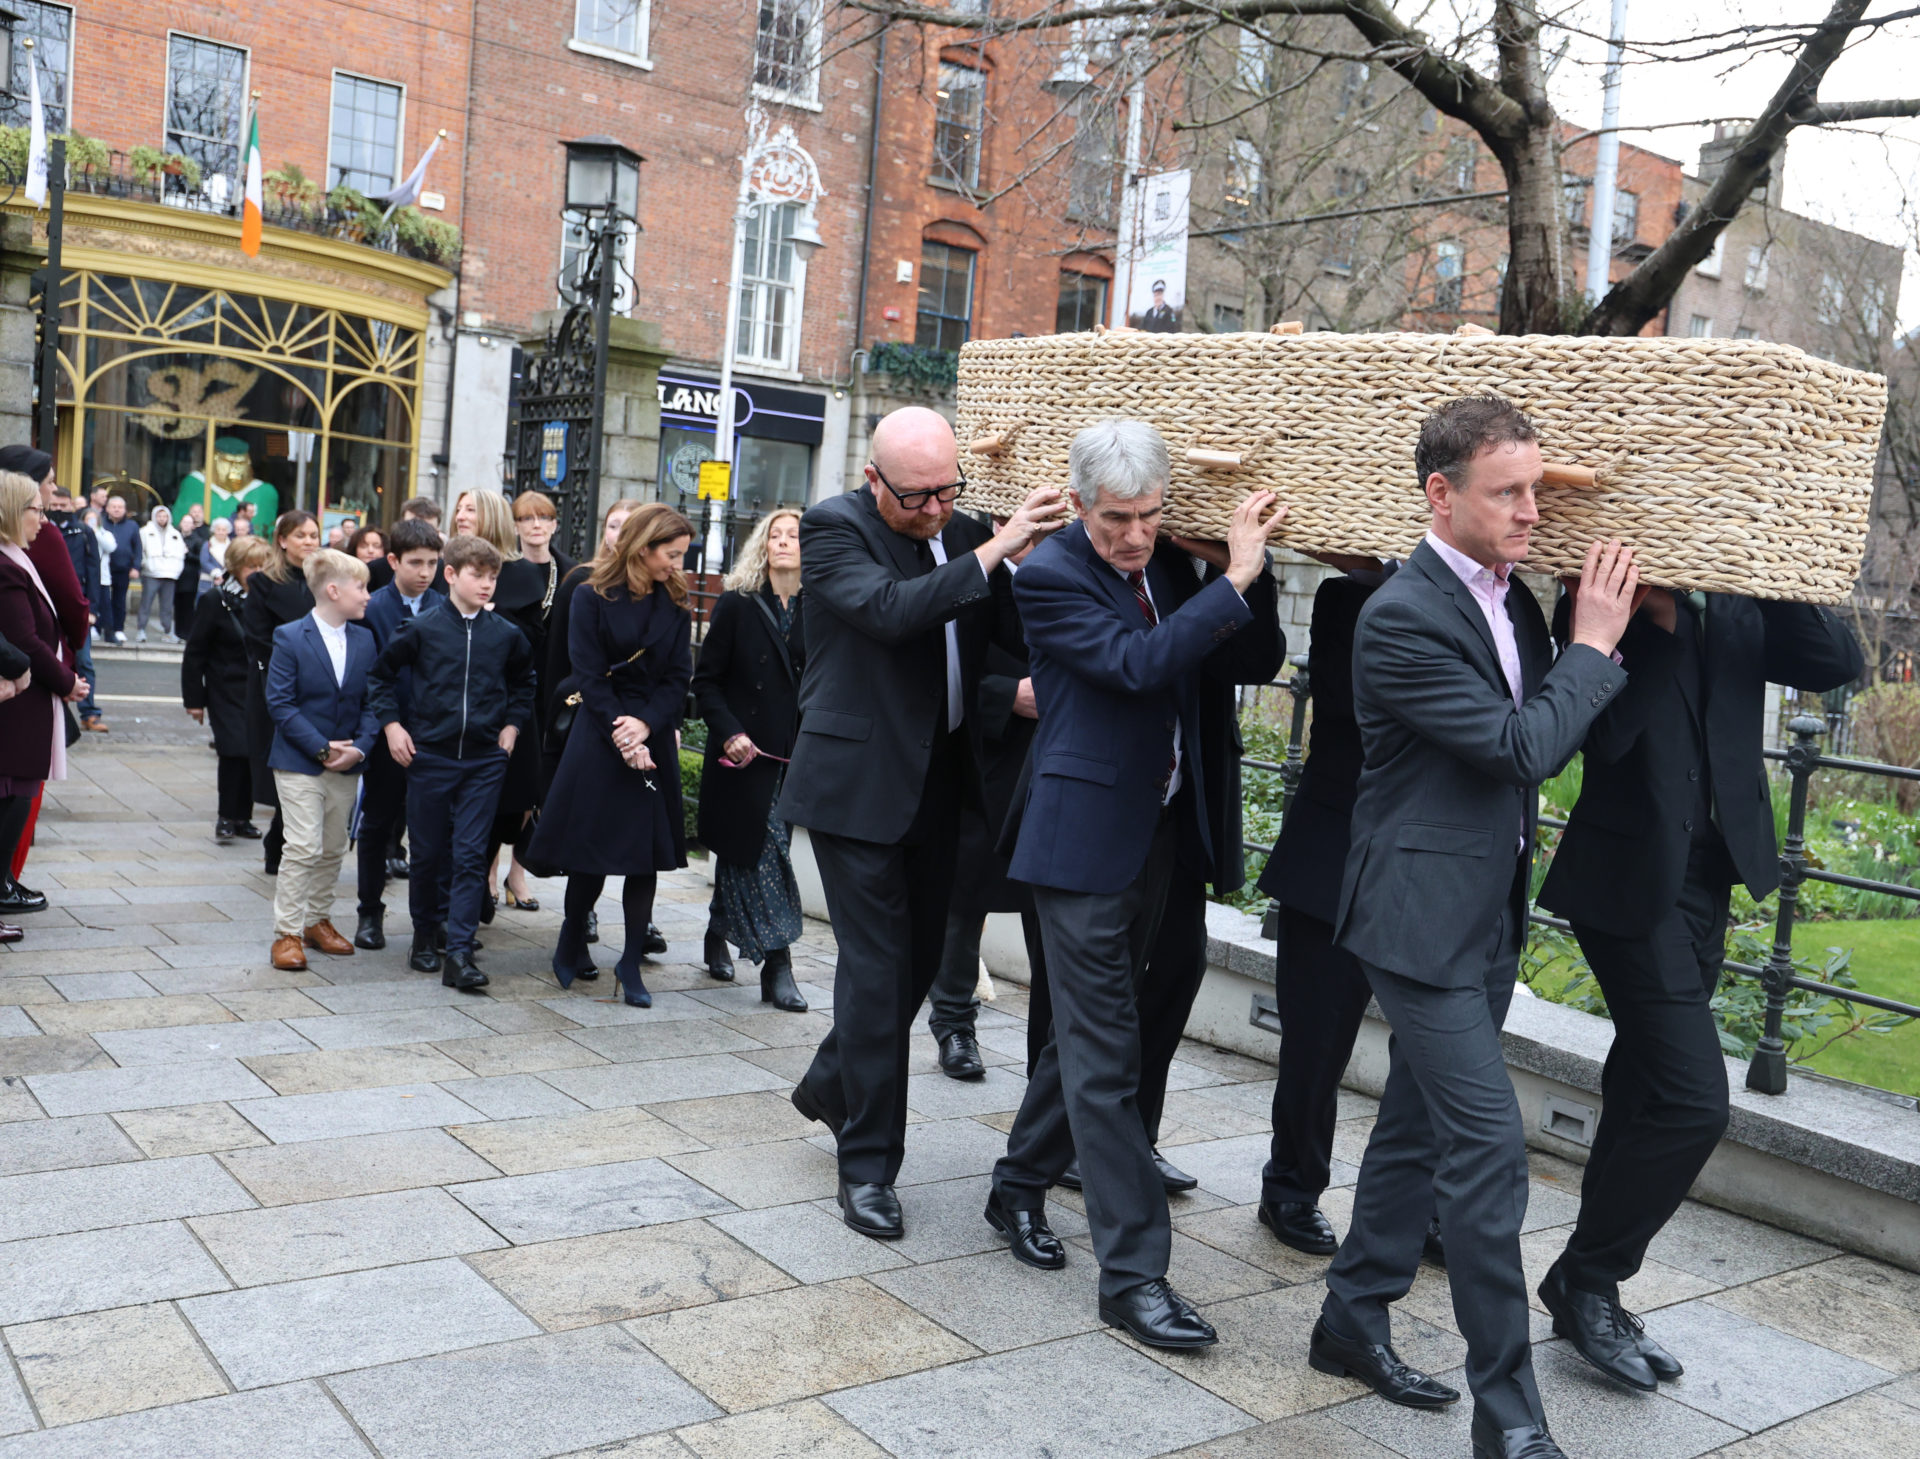 Family and loved ones follow Charlie Bird's coffin into the Mansion House ahead of his funeral service, 14-3-24